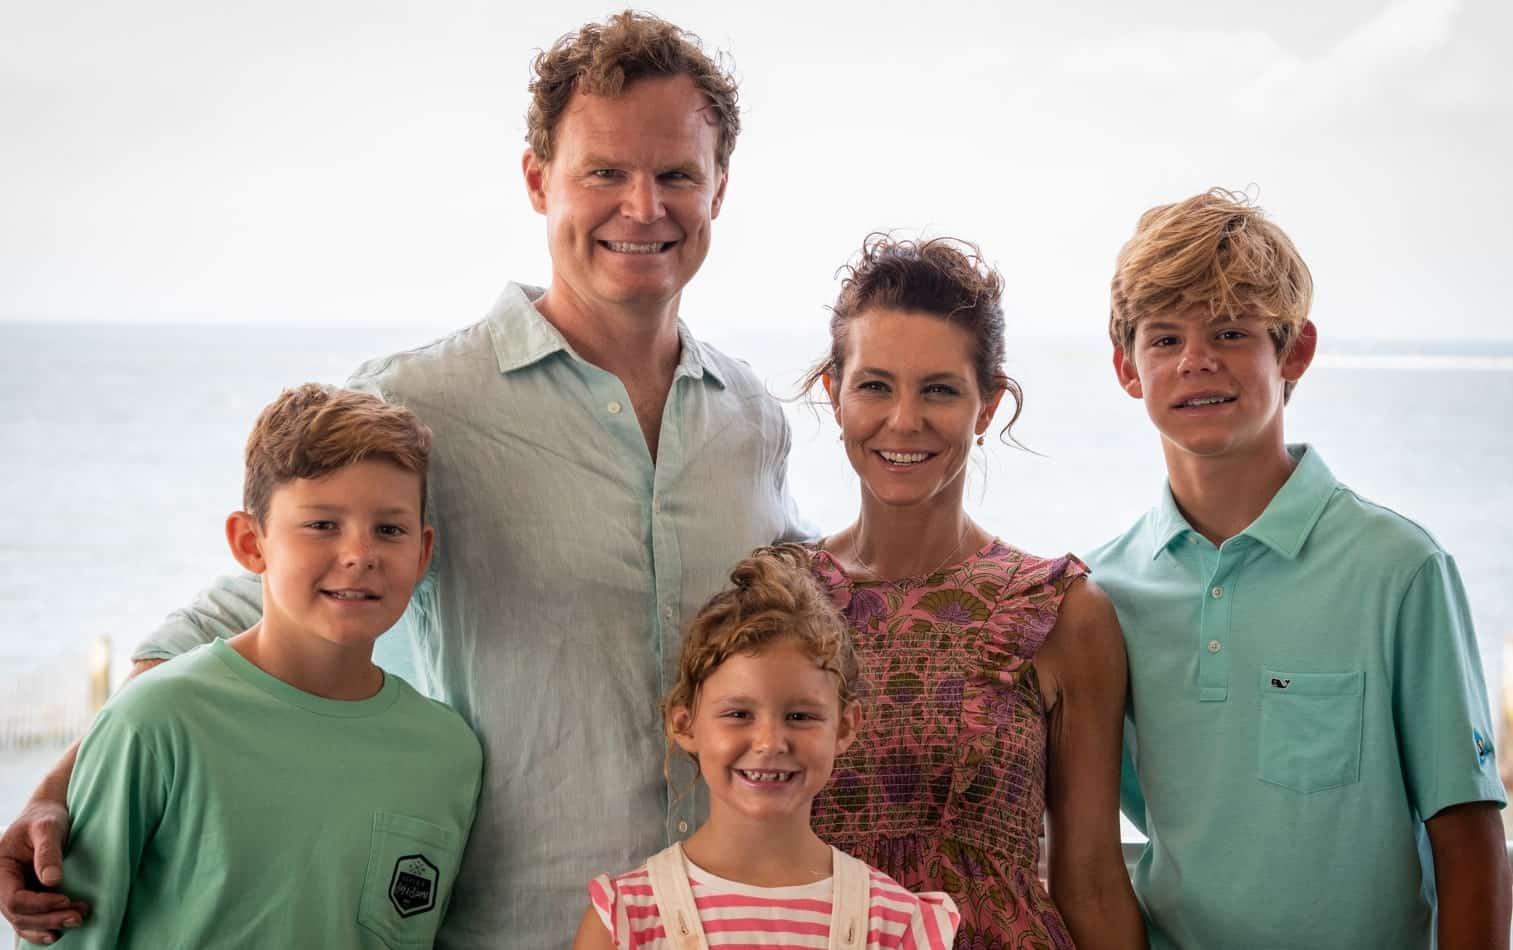 Image of Stephanie Ruhle and Andy Hubbard with their kids